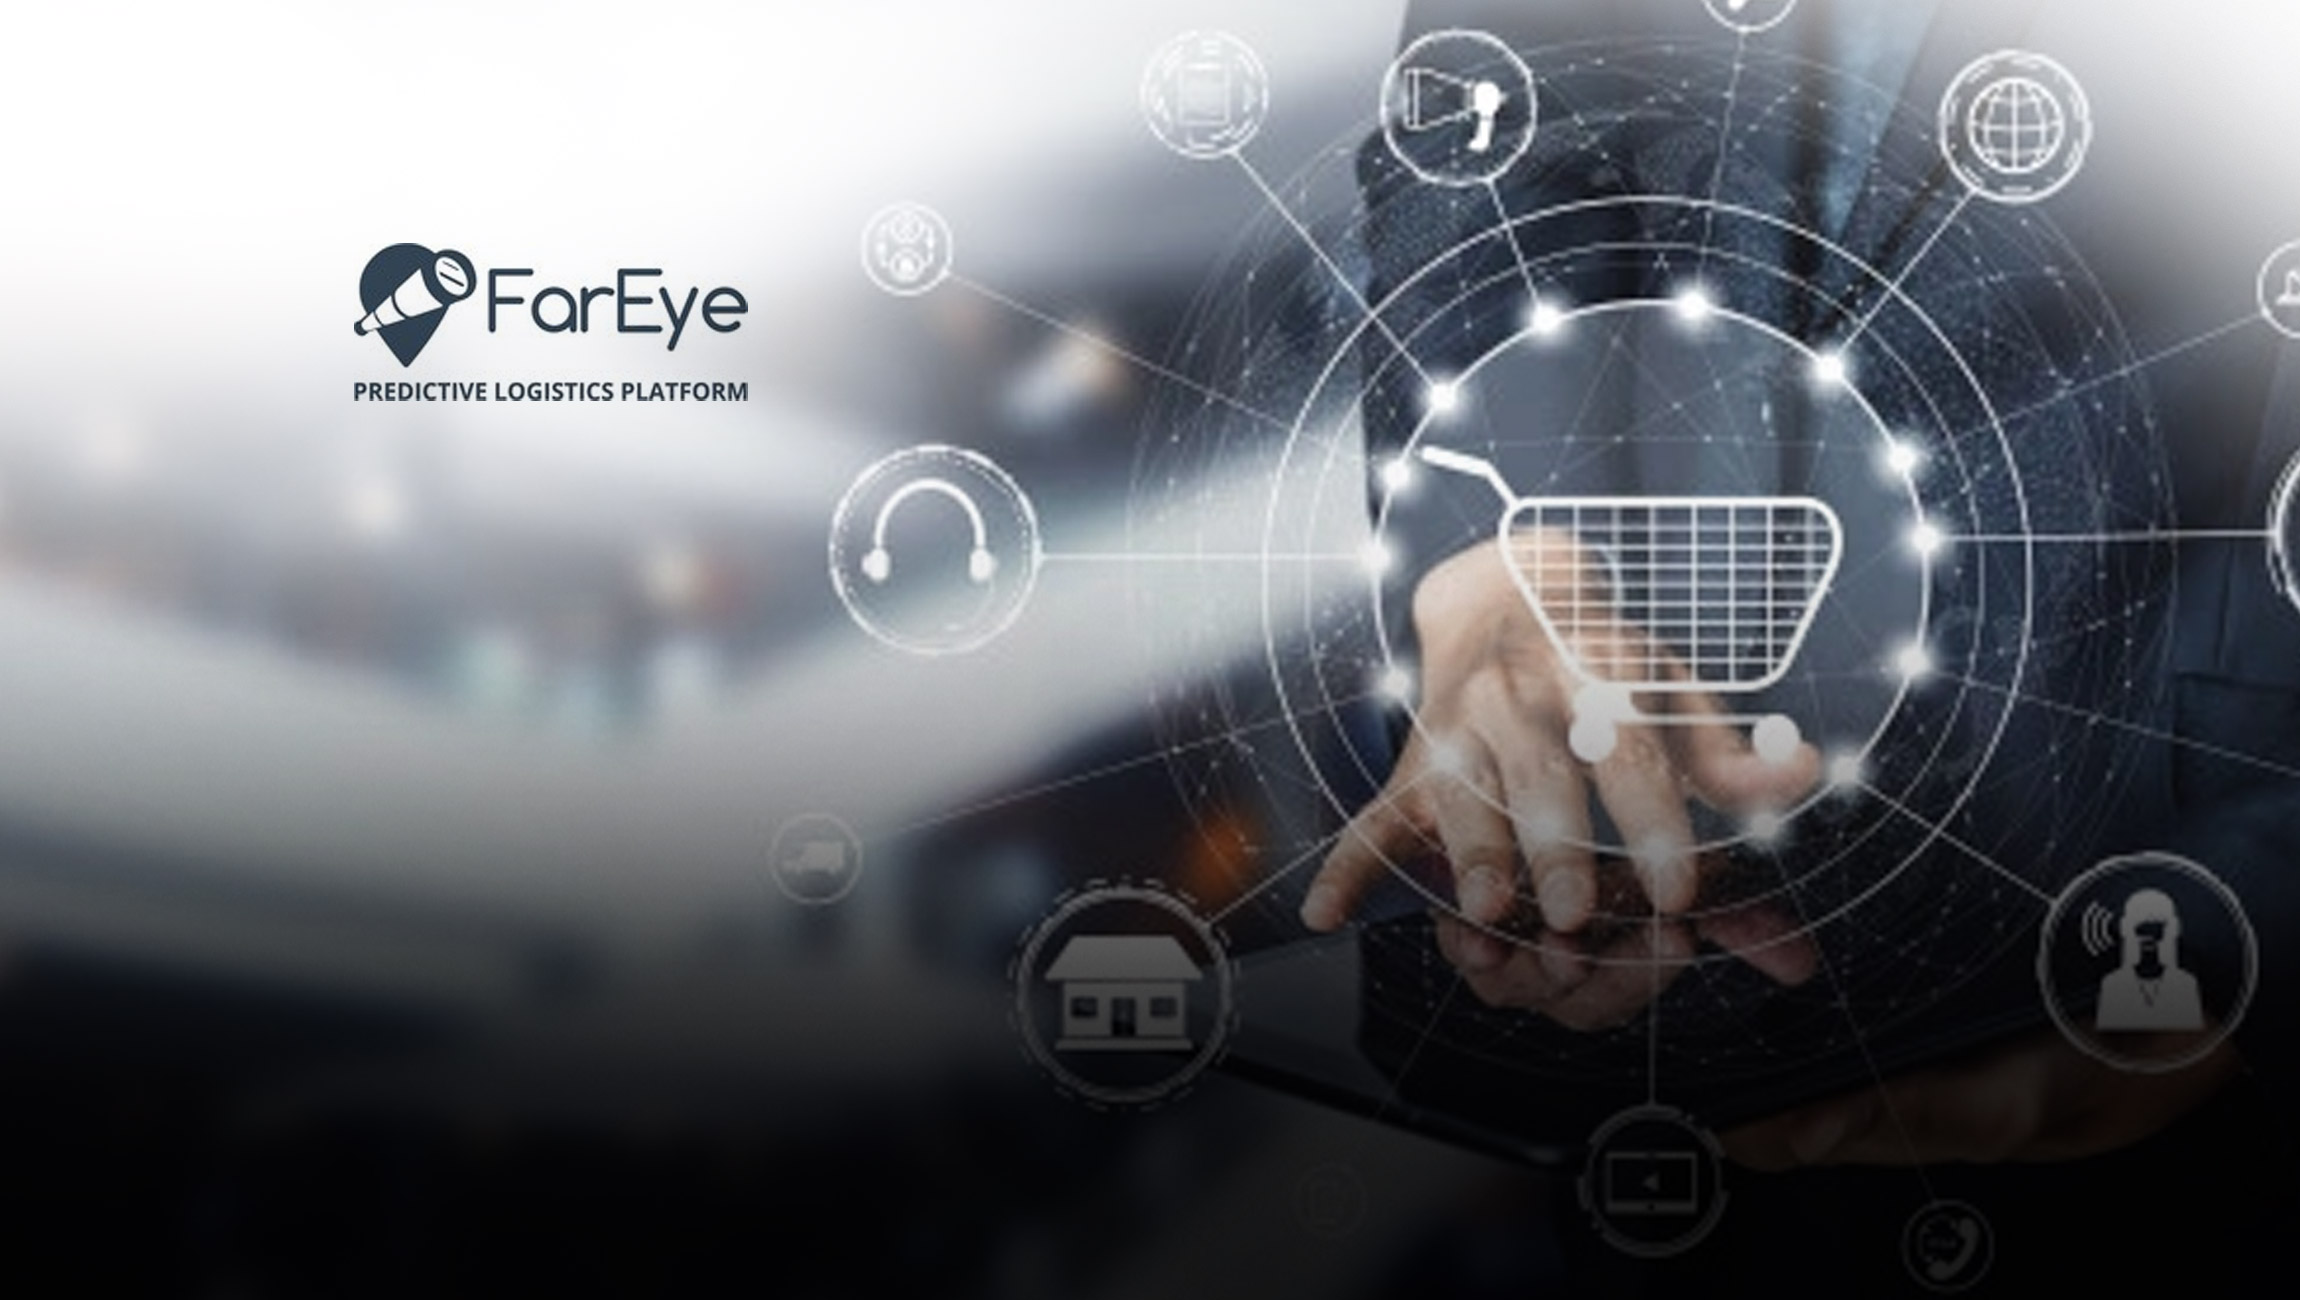 Gartner Mentions FarEye in the 2021 Market Guide for Vehicle Routing & Scheduling and Last Mile Technologies for the Fourth Time in a Row